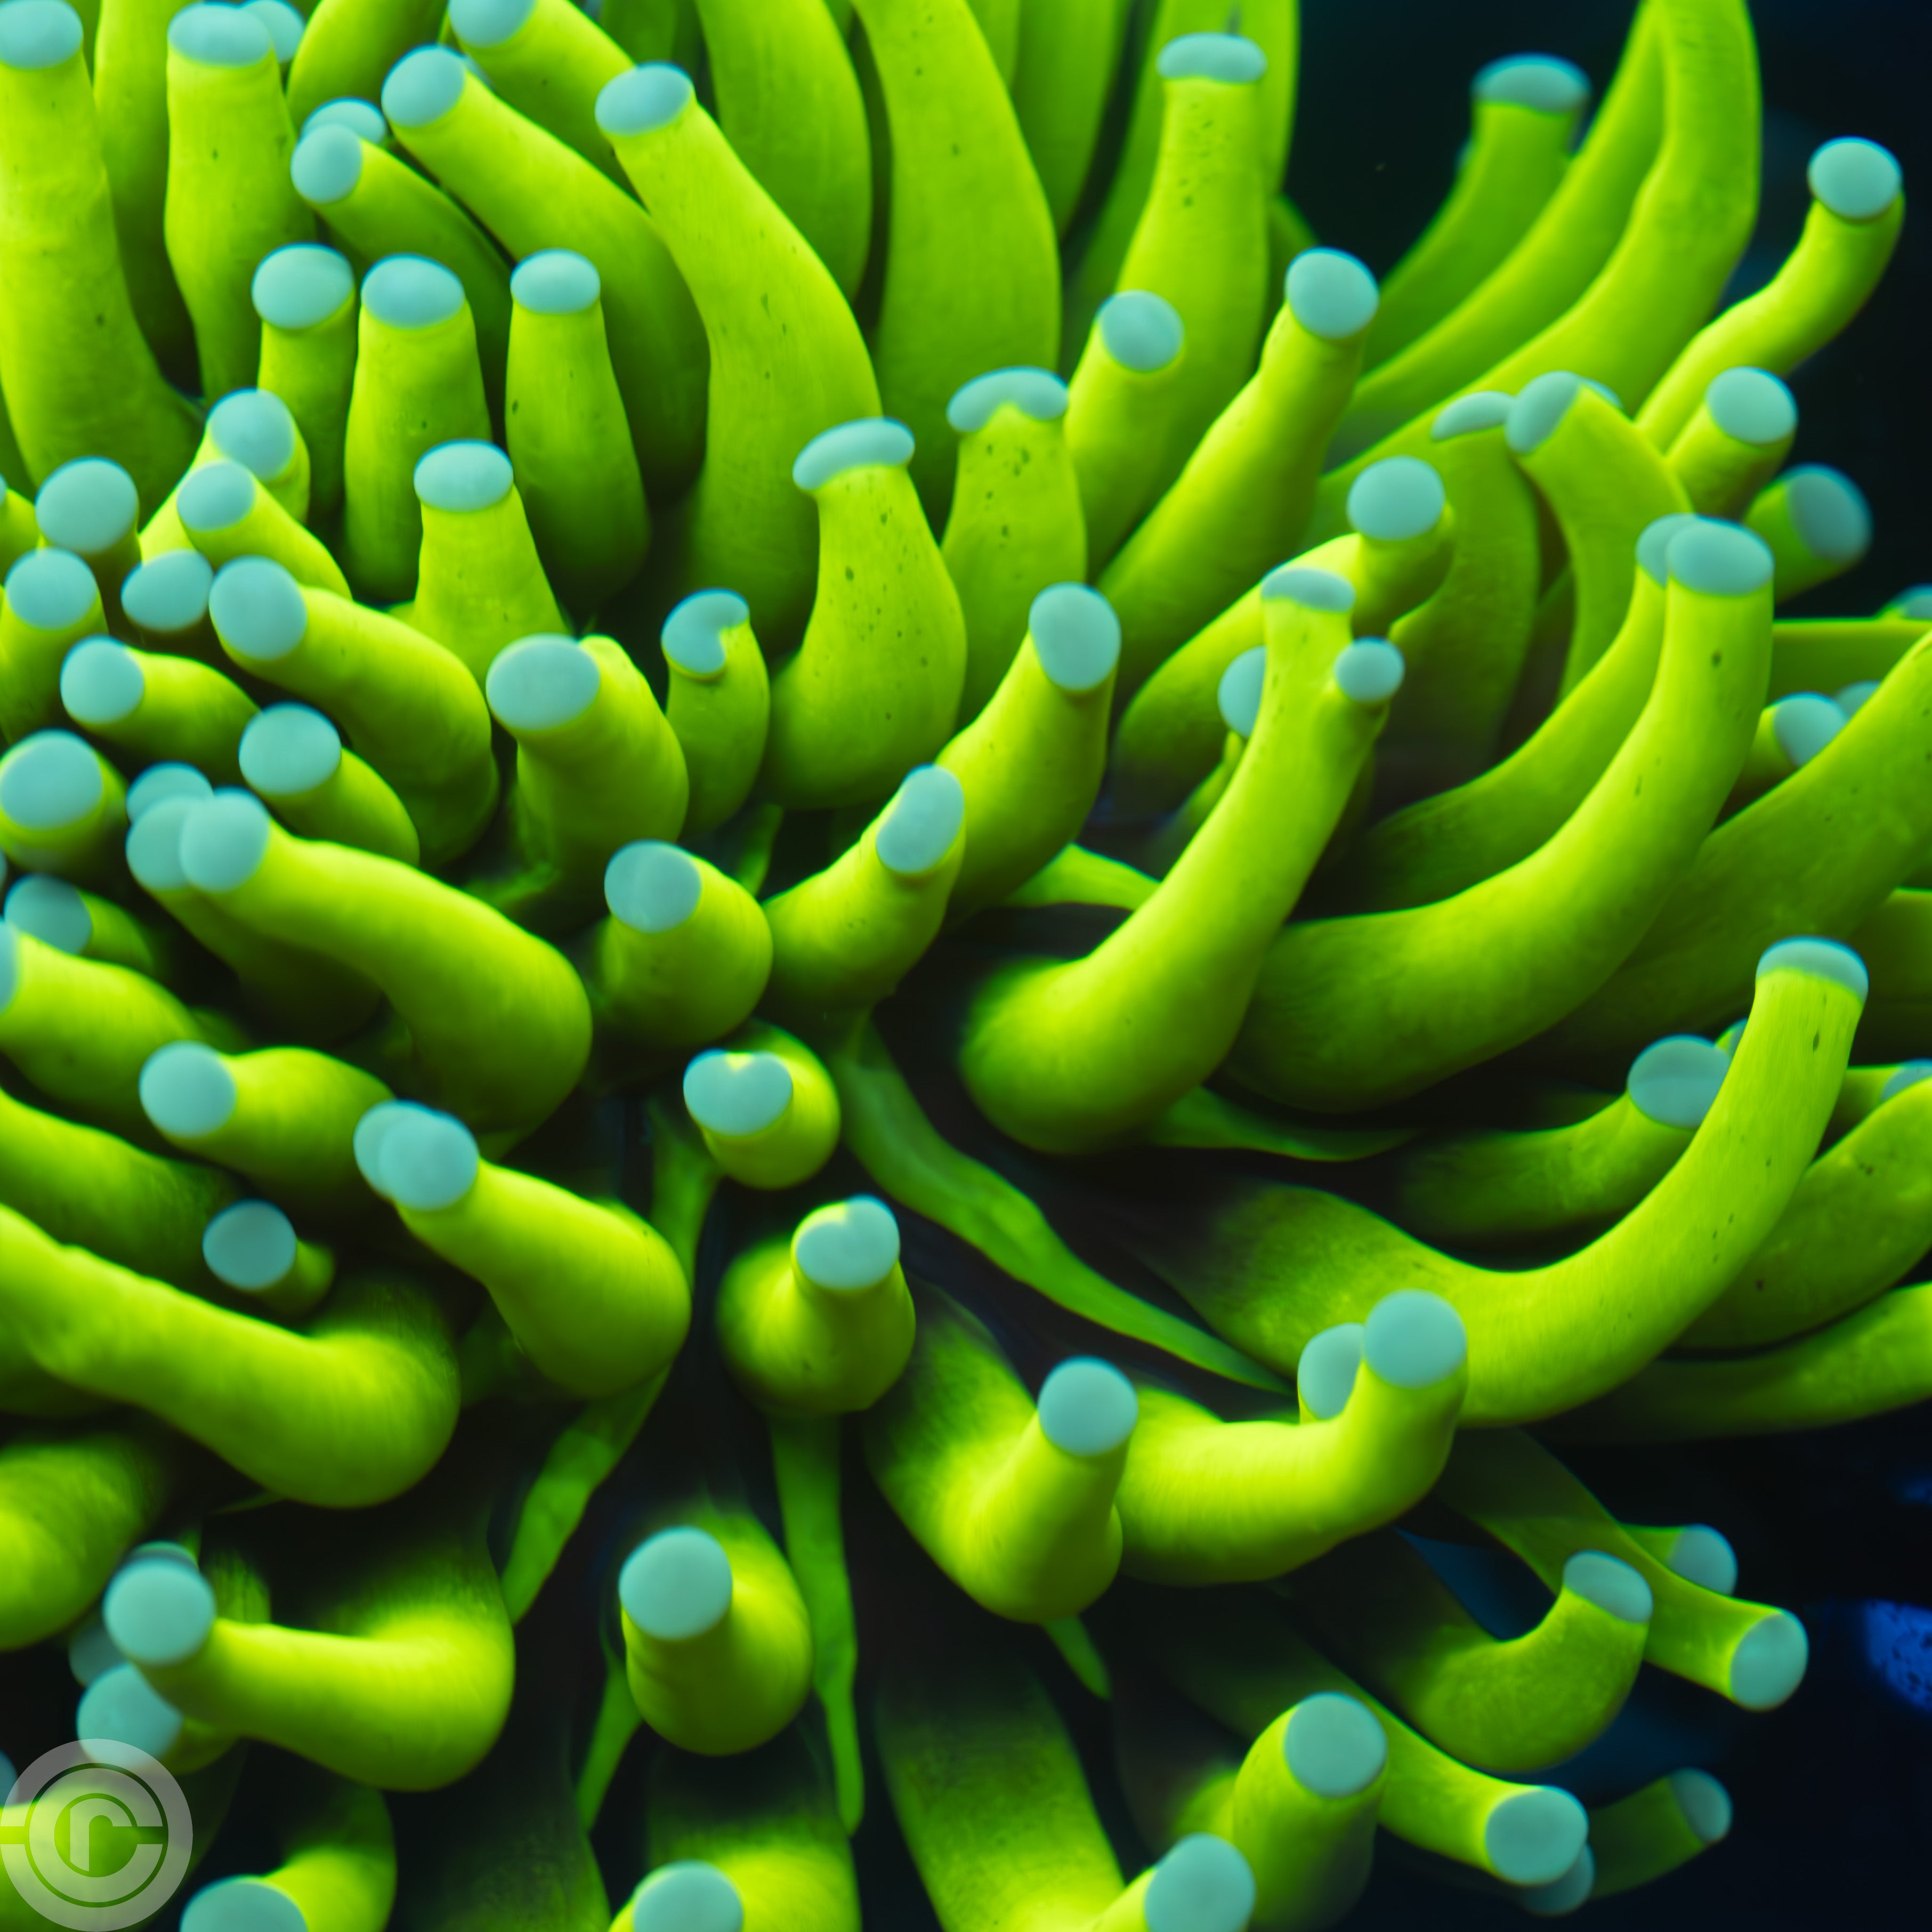 Torch Coral: The Rockstar of Reef Tanks - When to feed torch coral